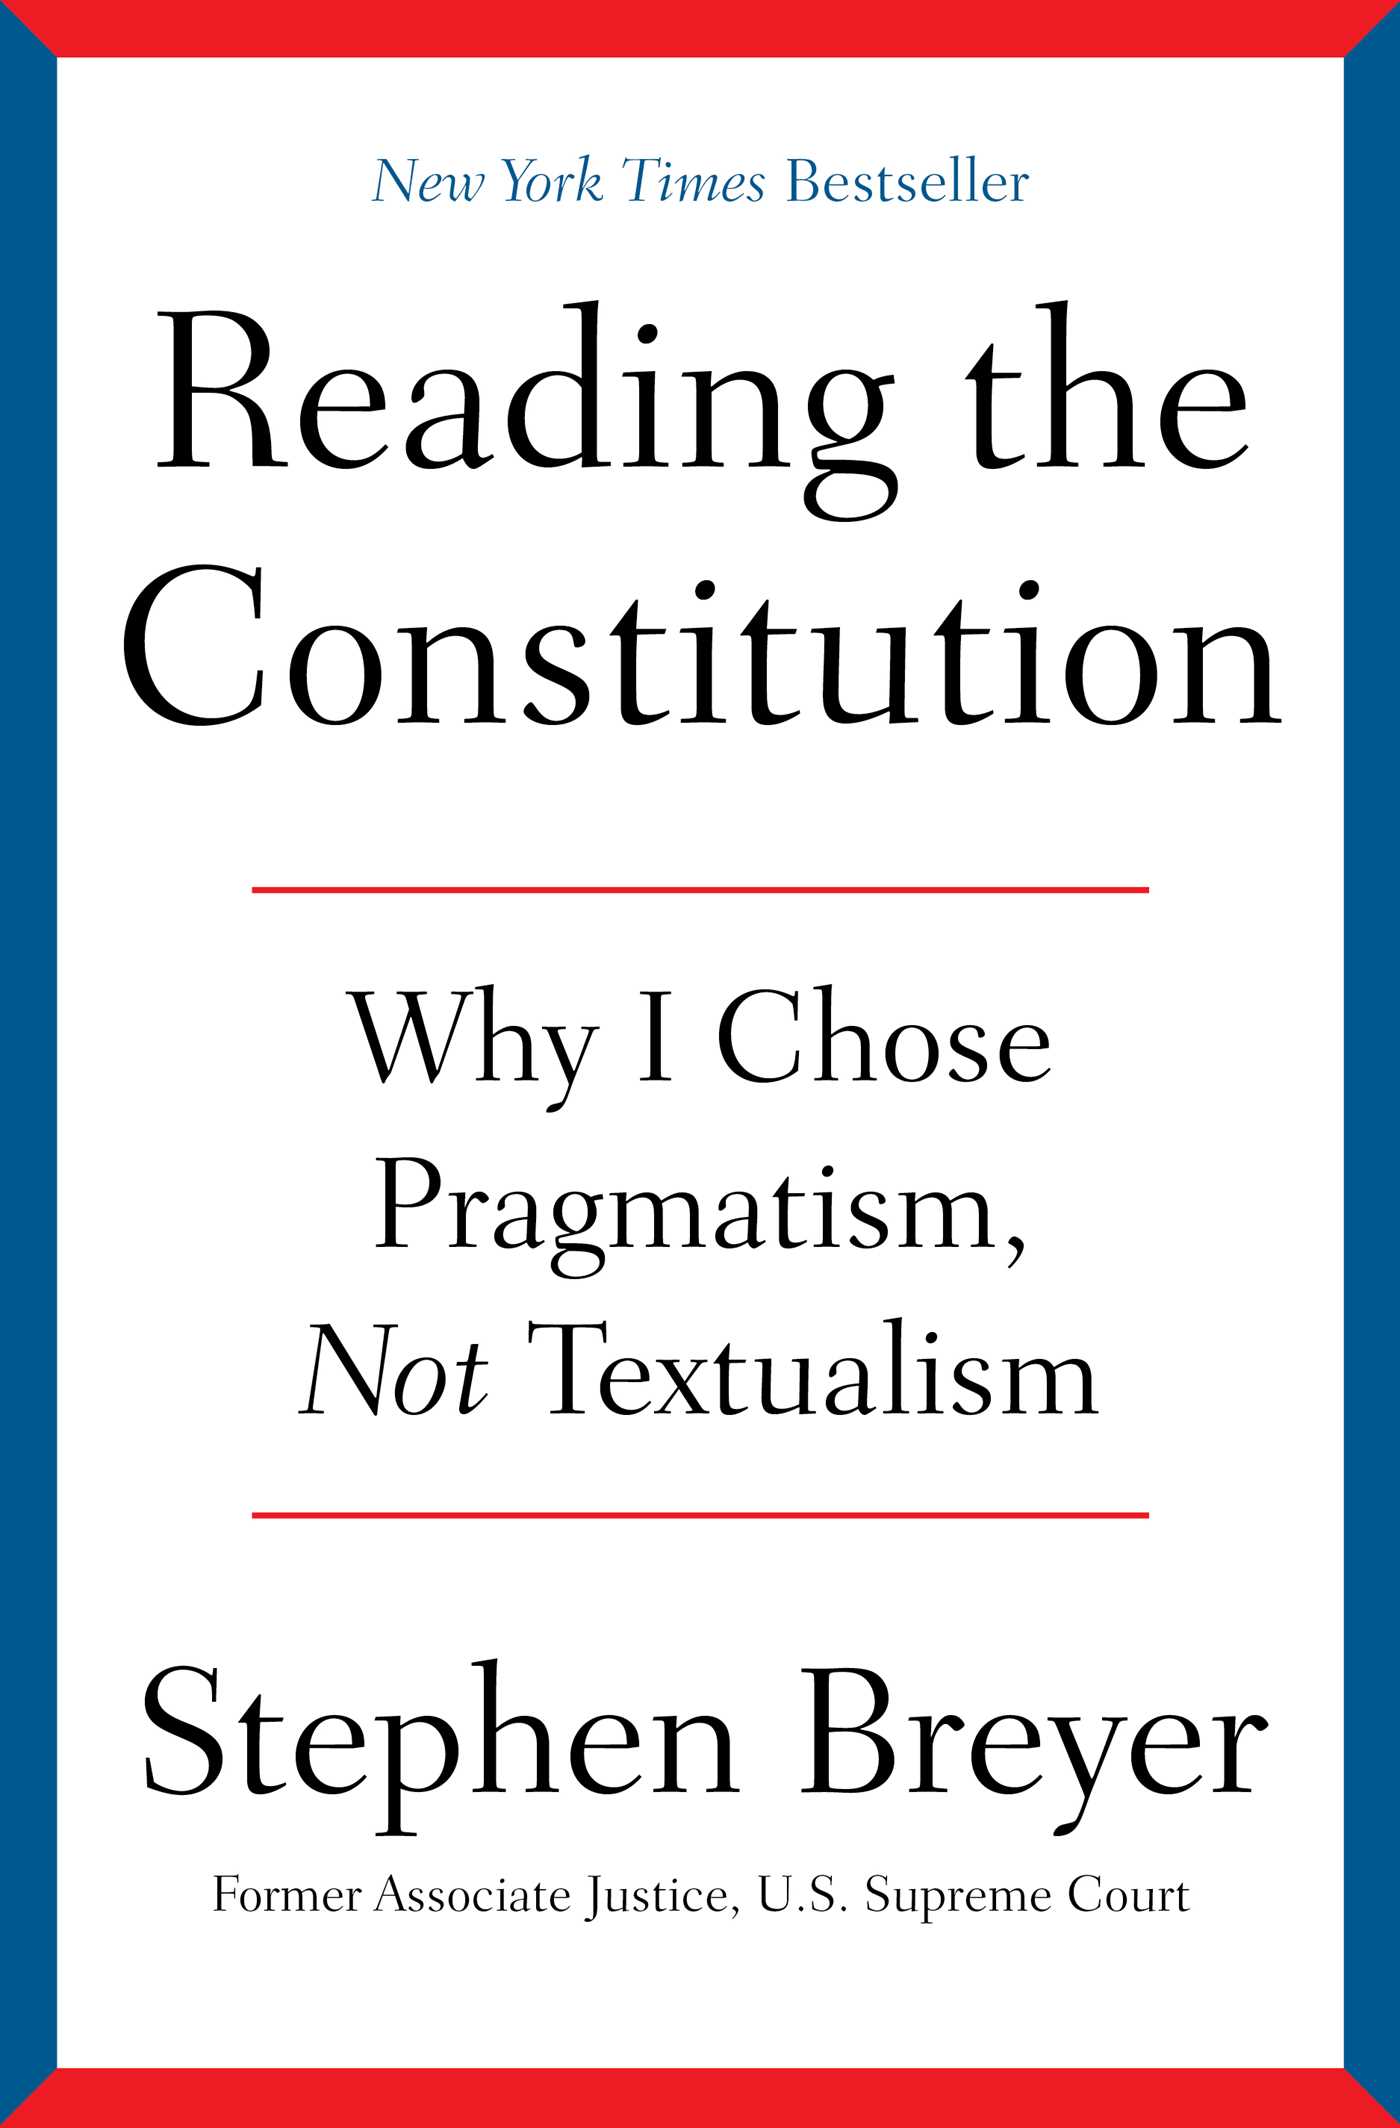 Reading the Constitution Why I Chose Pragmatism, Not Textualism cover image